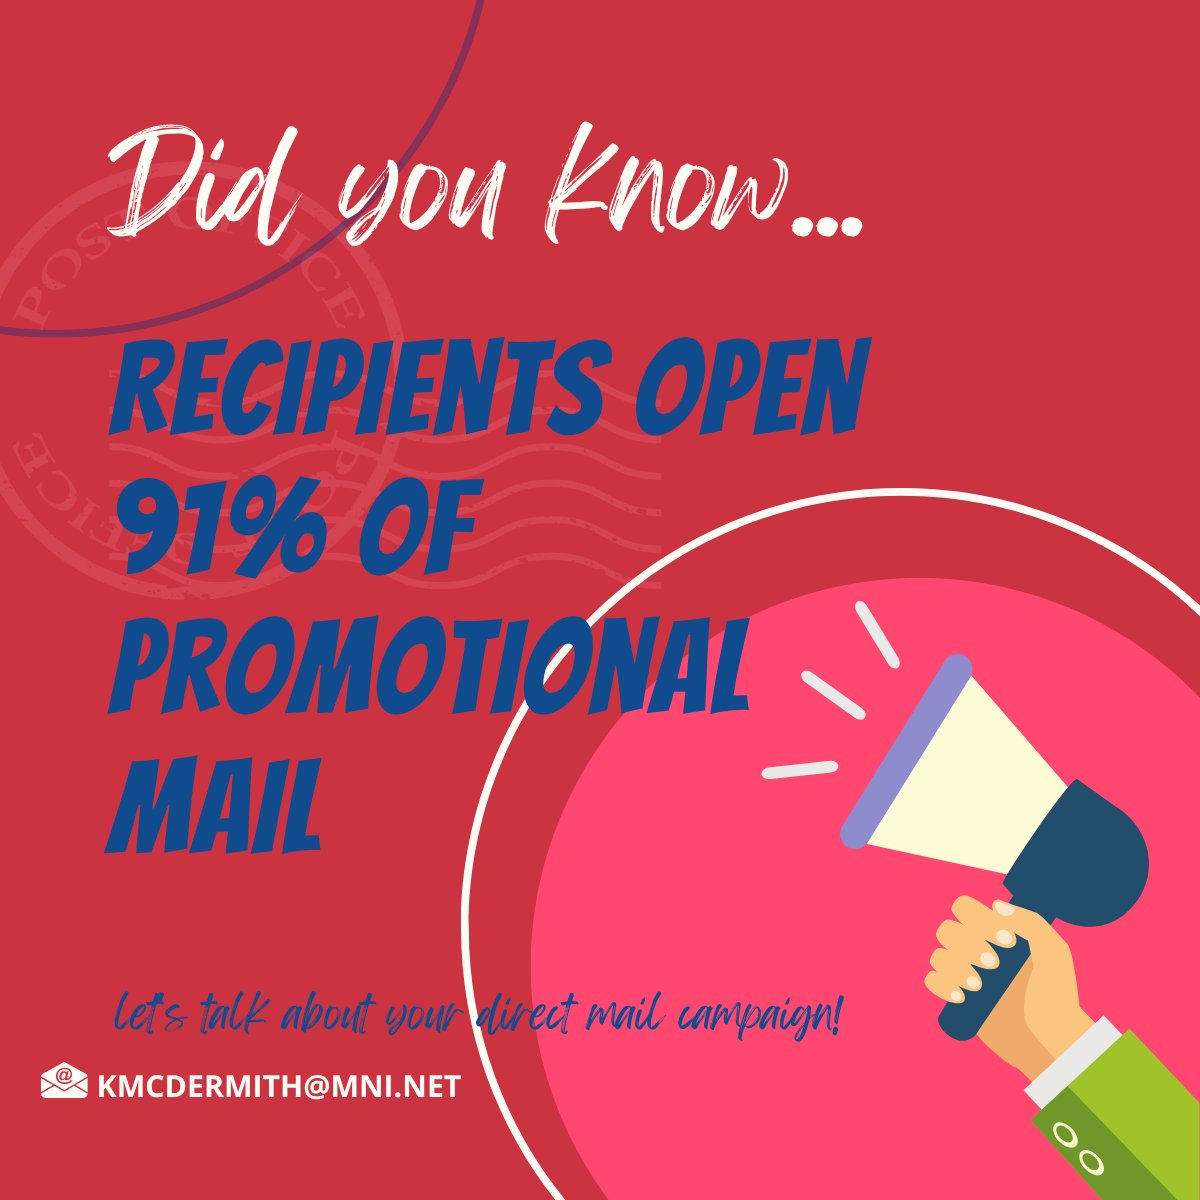 What's your cold email open rate?
91% for direct mail is really a great stat!
#marketing #industrialmarketing #manufacturing #USAMfgHour #industrialsupply